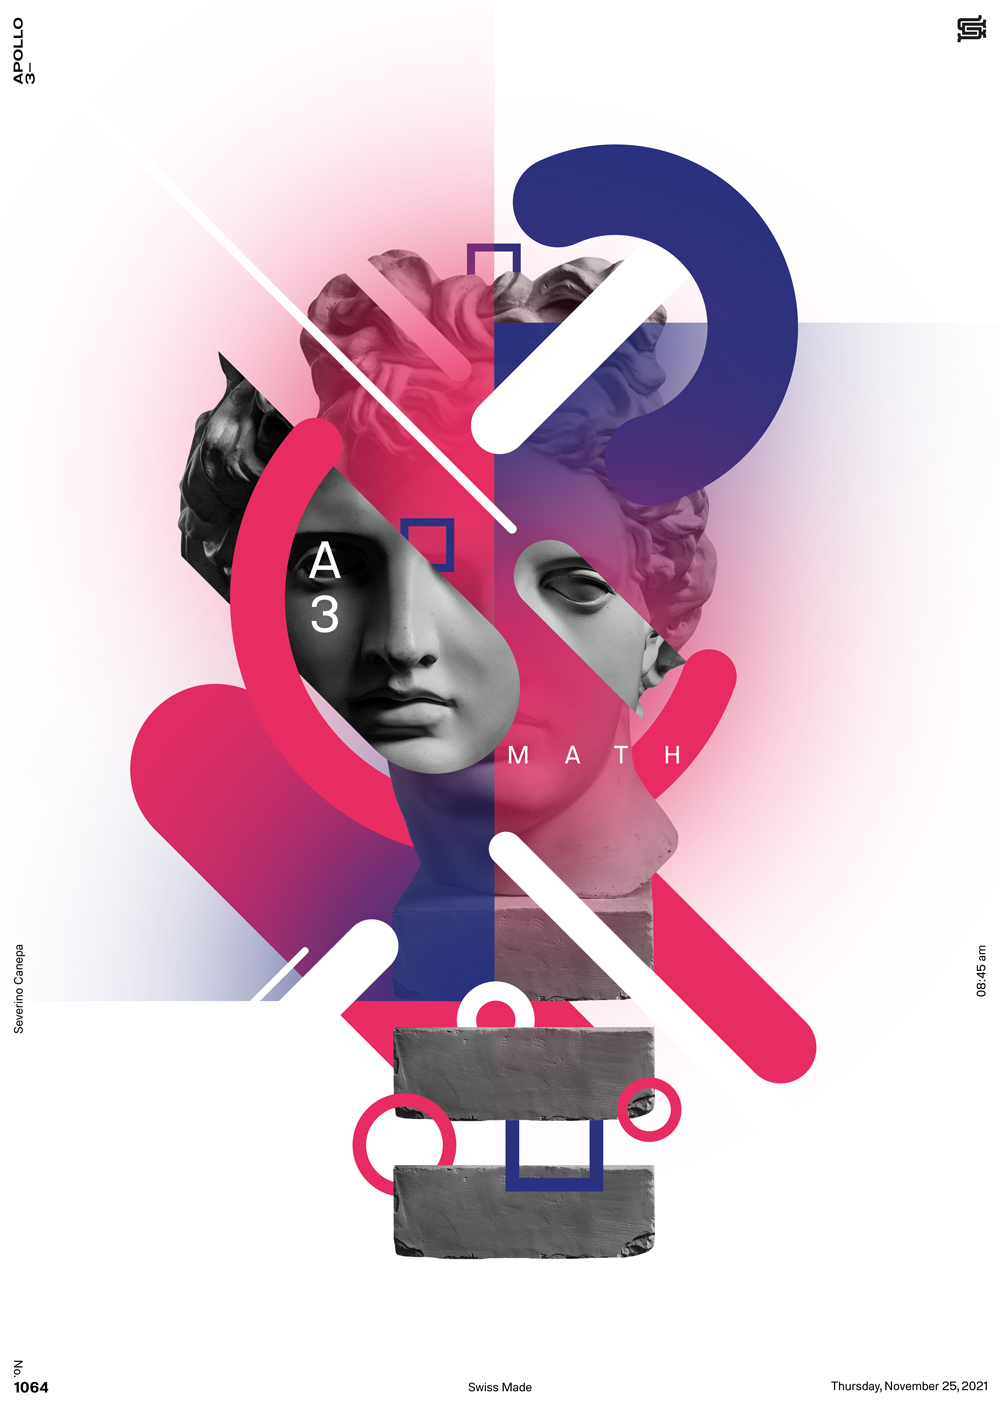 Playful and creative design made with rounded lines and Apollo's picture